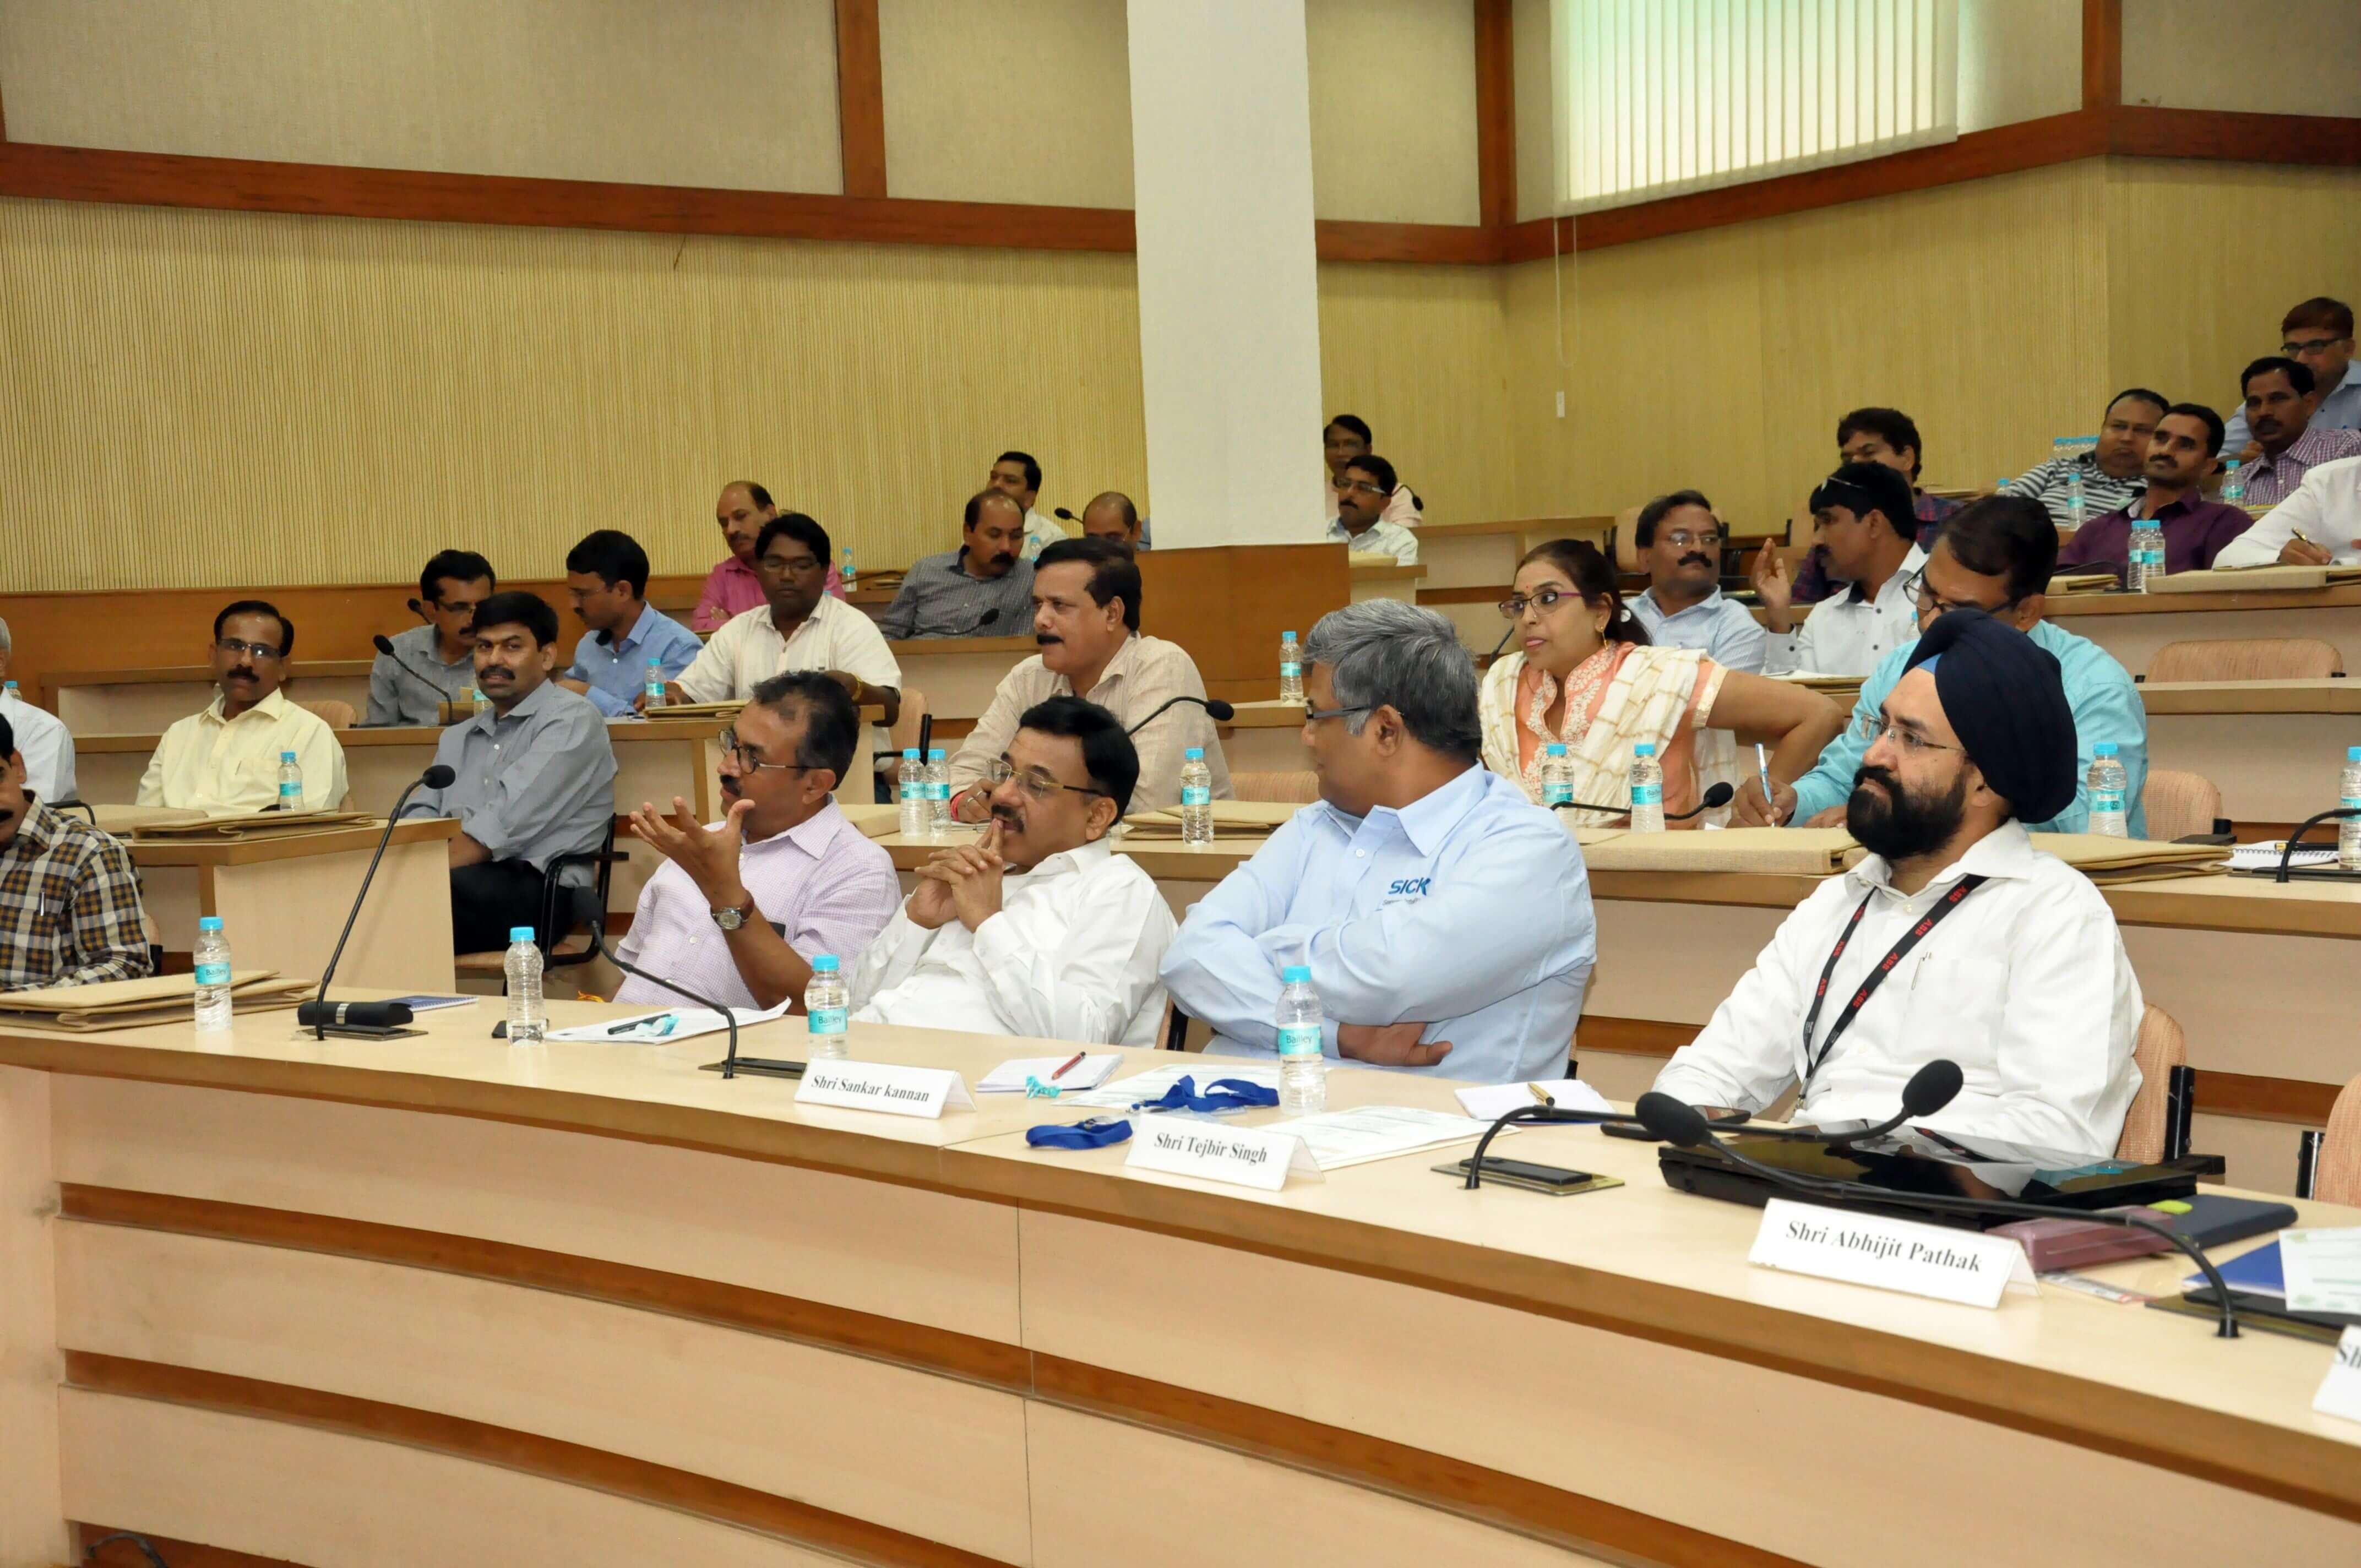 Shri Hemant Sharma, Director, Environment making a point during the session